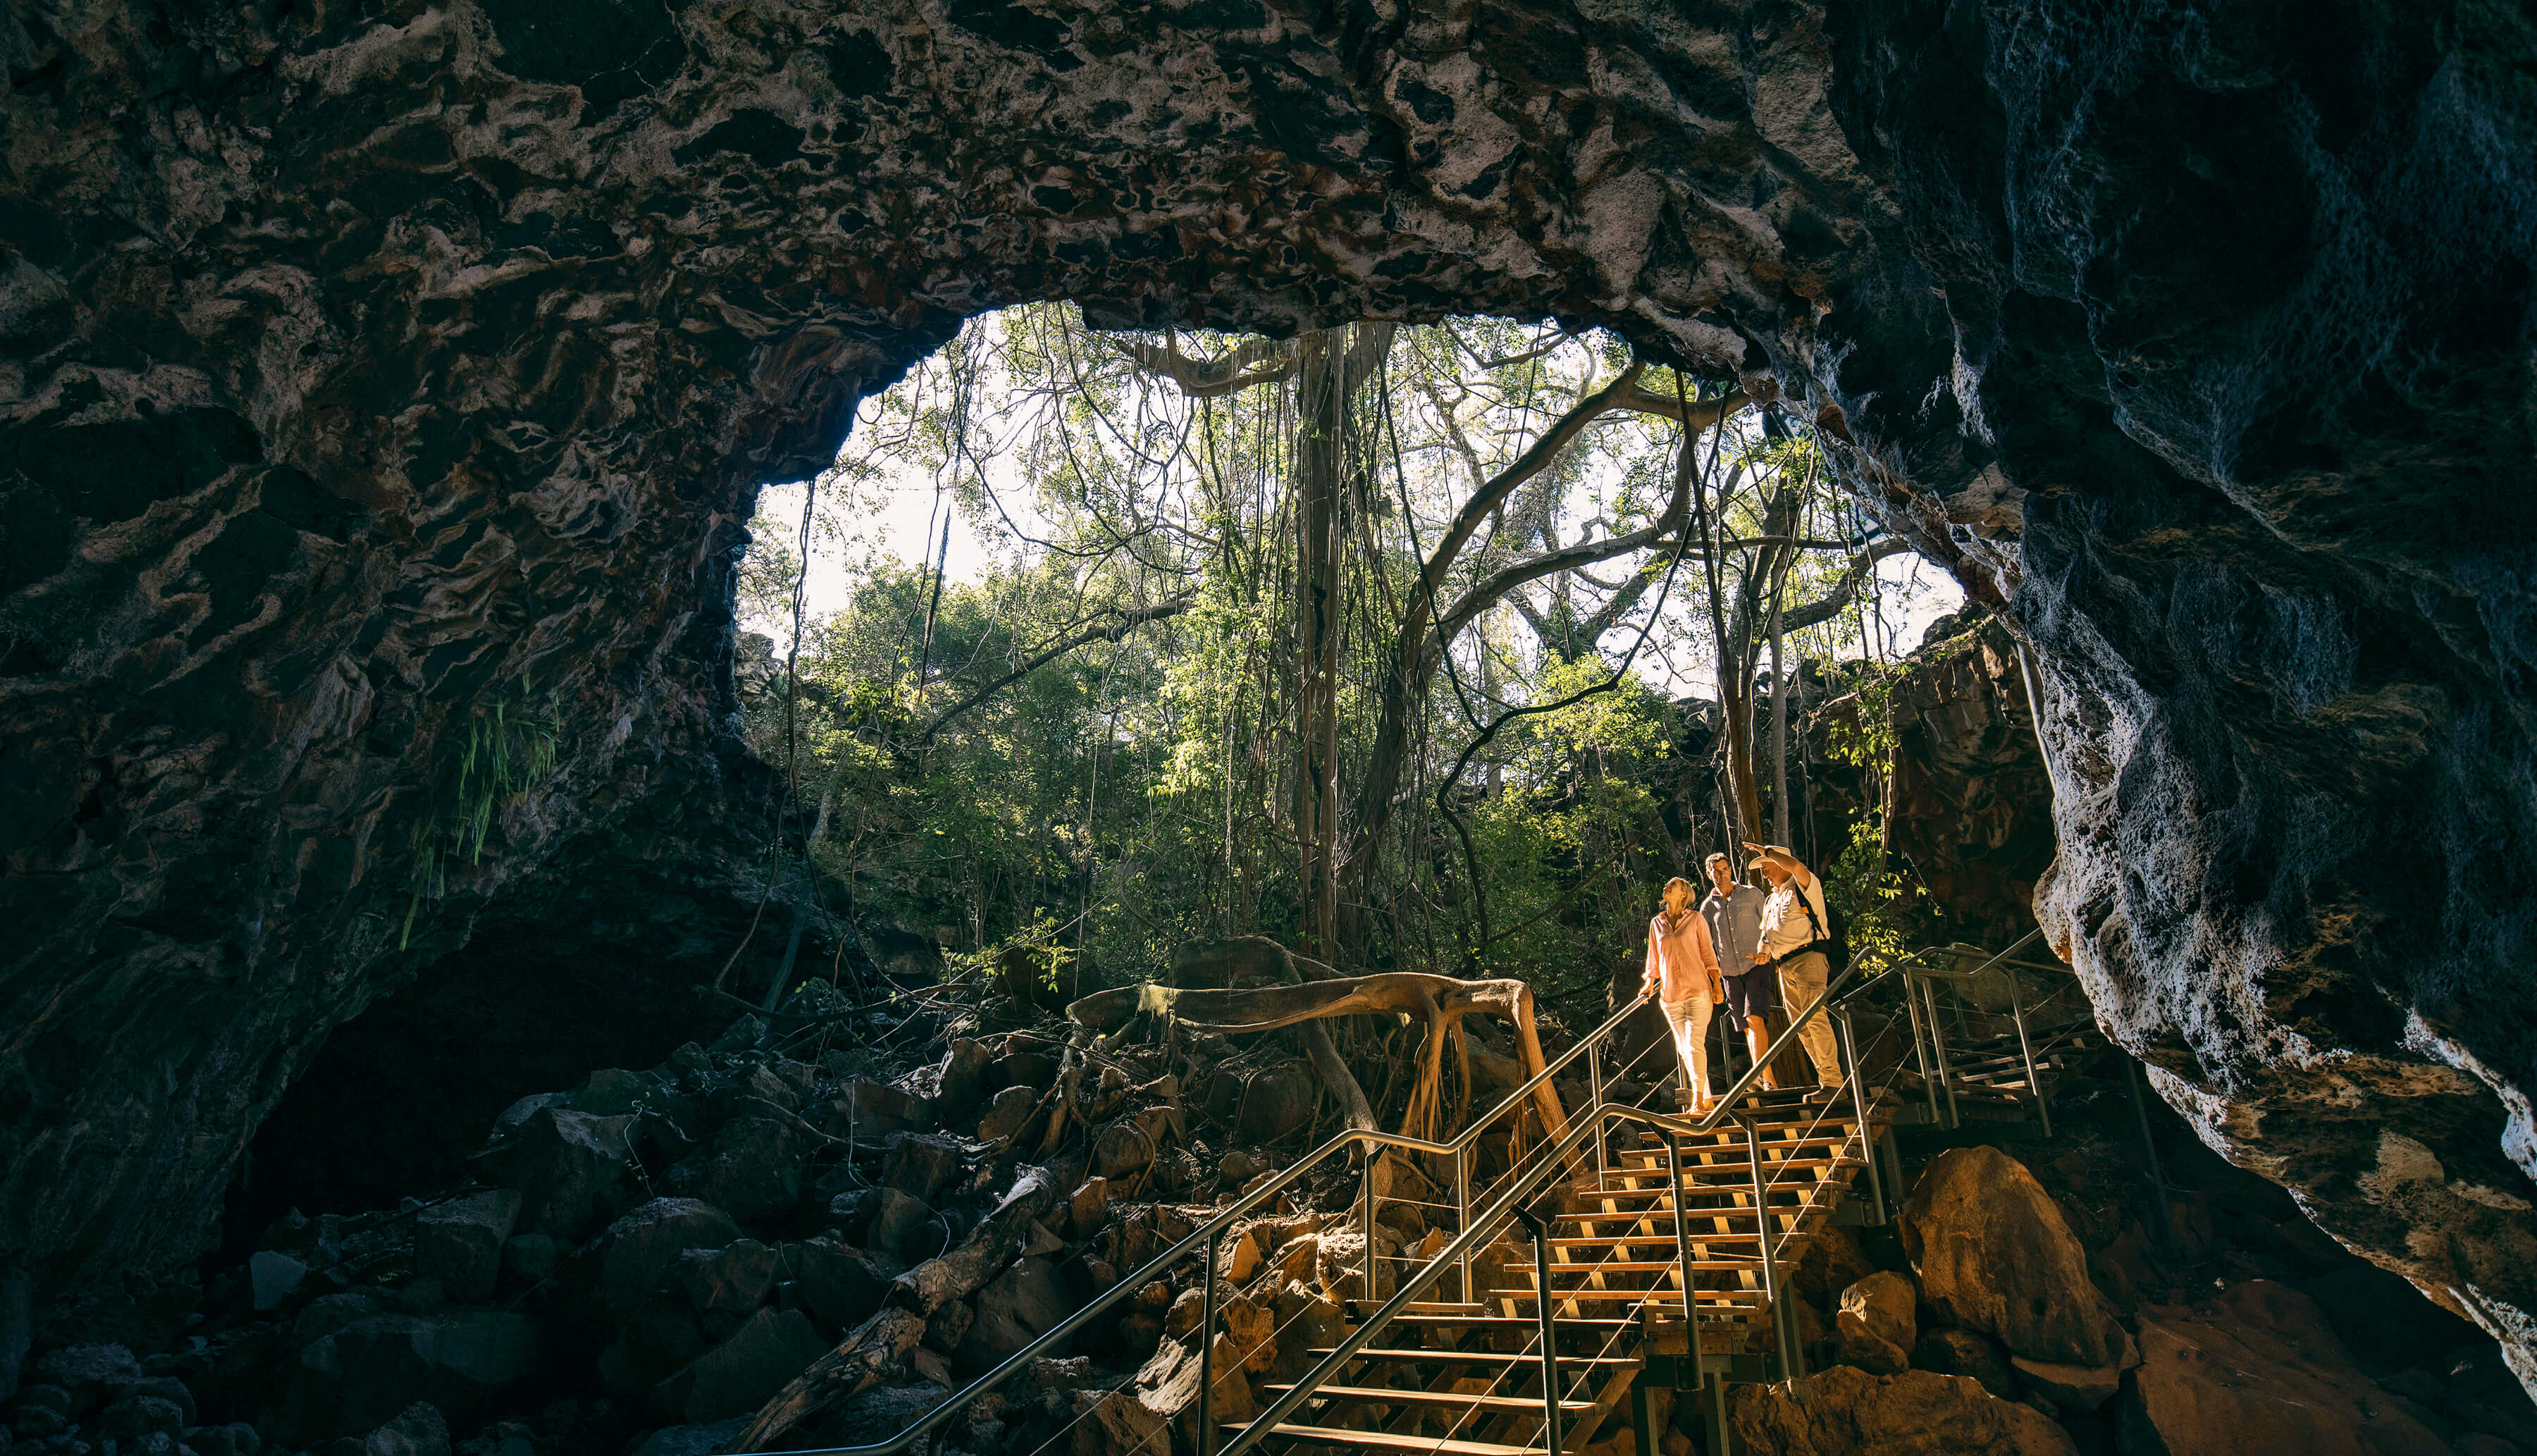 People on guided tour at Undara Lava Tubes